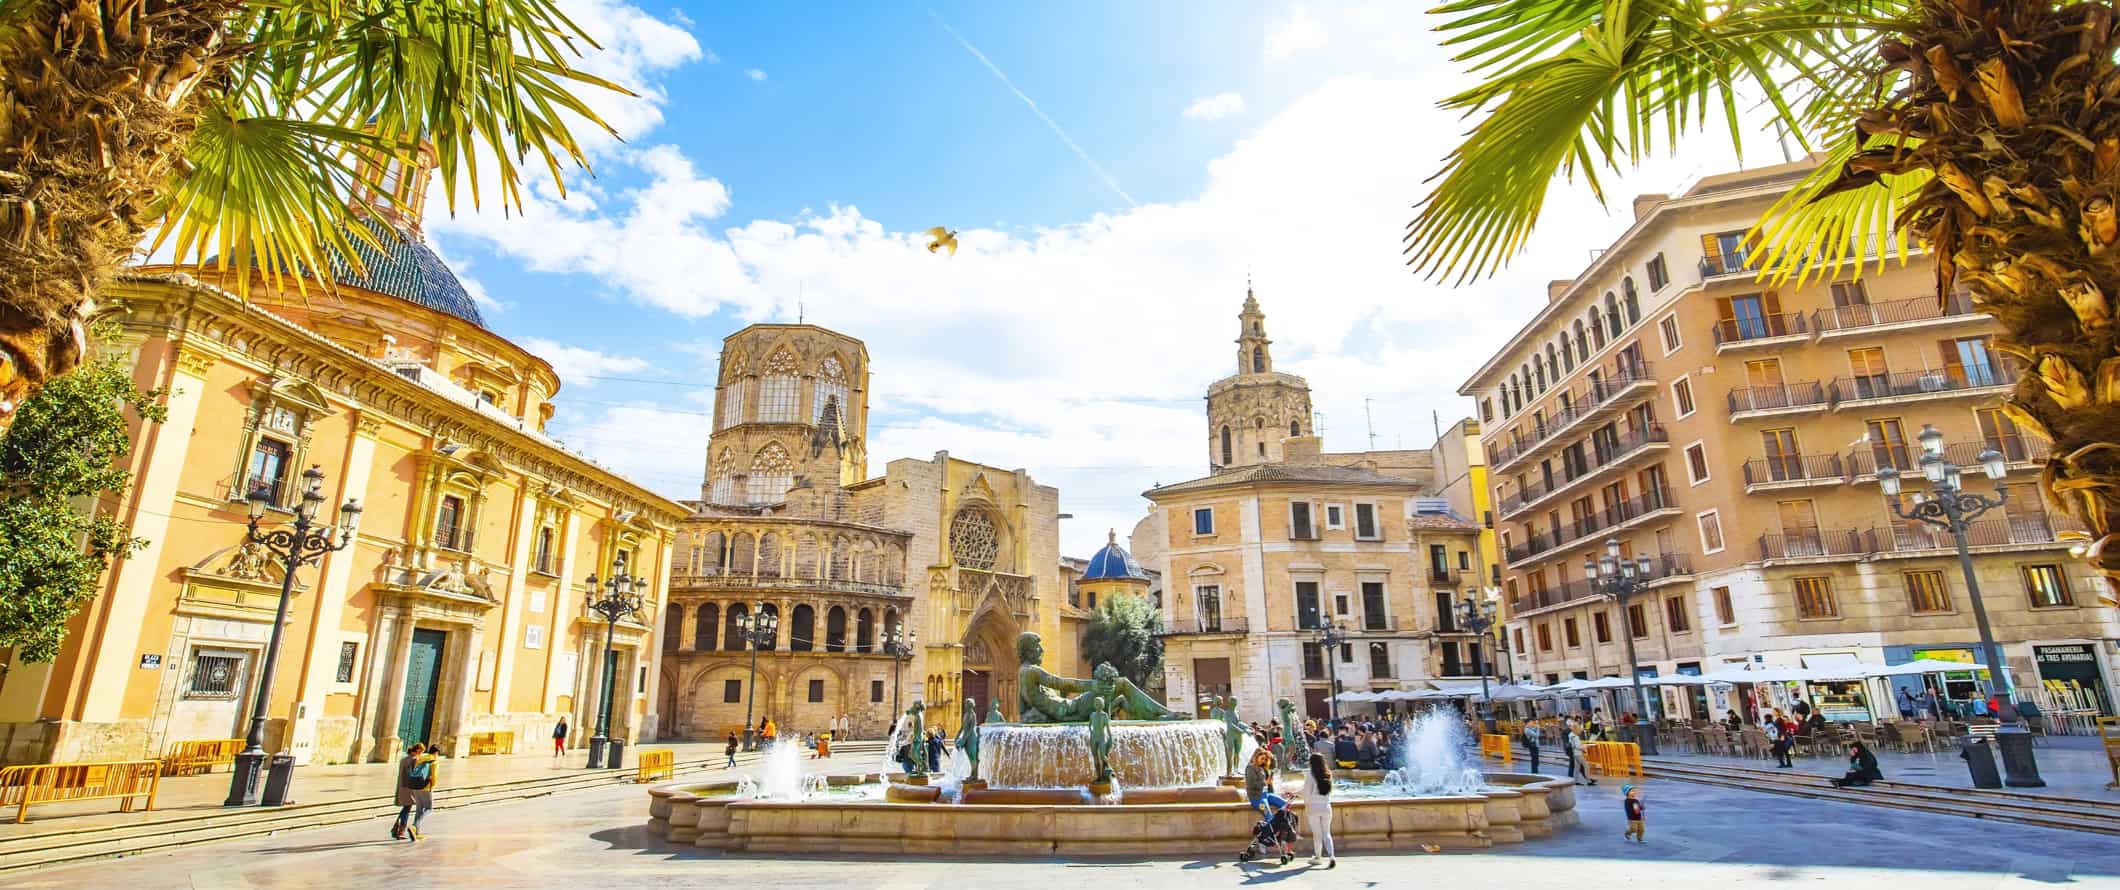 The stunning historic architecture of Valencia, Spain, featuring old buildings and a fountain surrounded by people